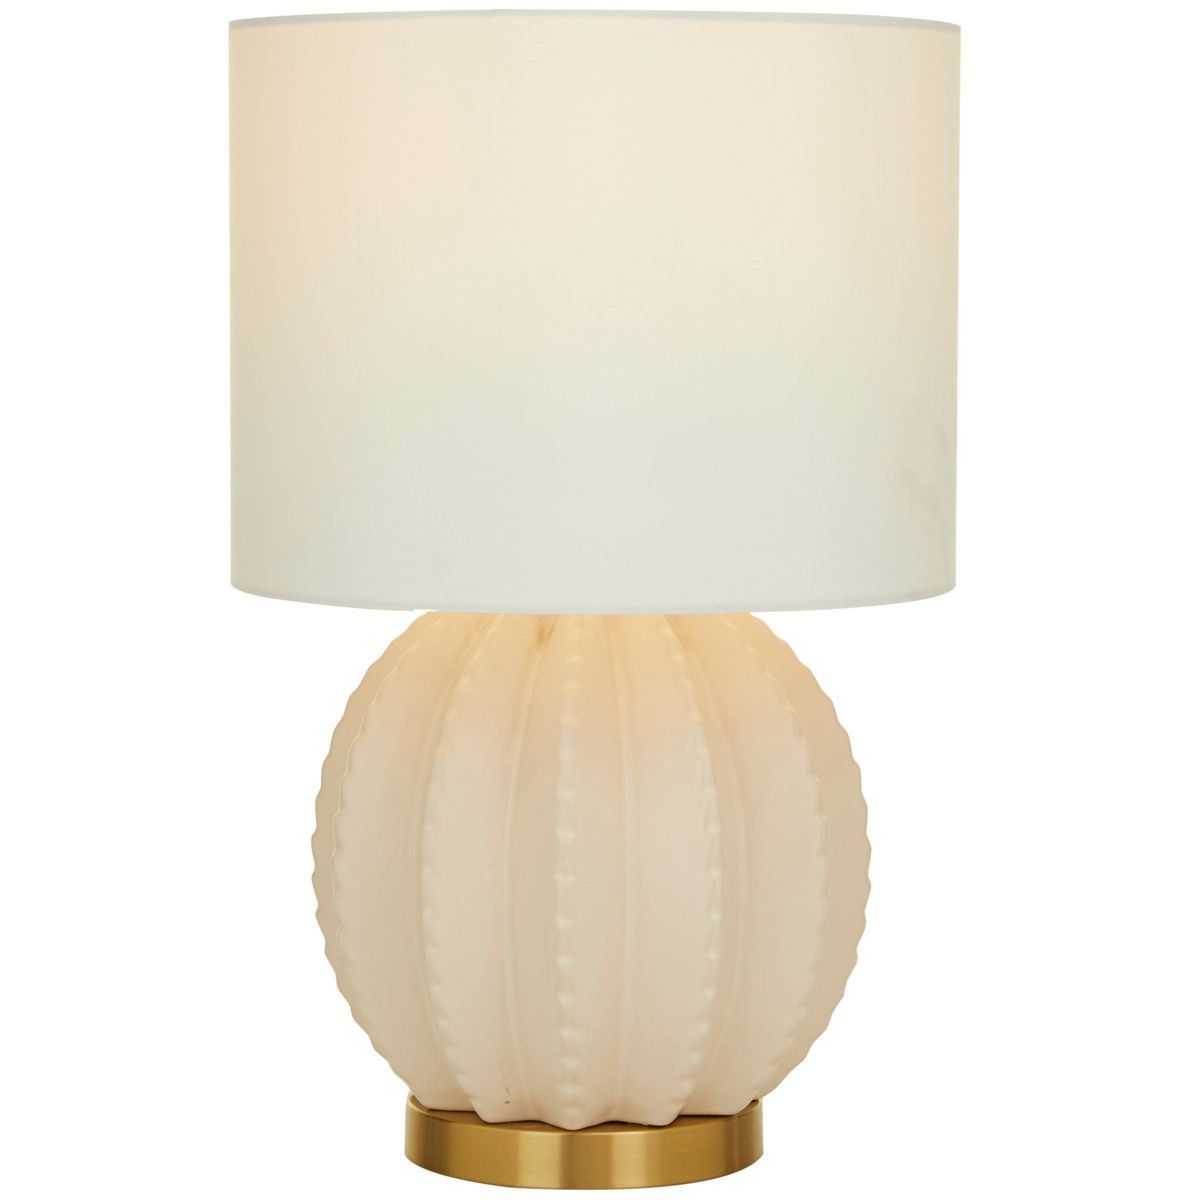 Ceramic Gourd Style Base Table Lamp with Drum Shade Cream - CosmoLiving by Cosmopolitan | Target